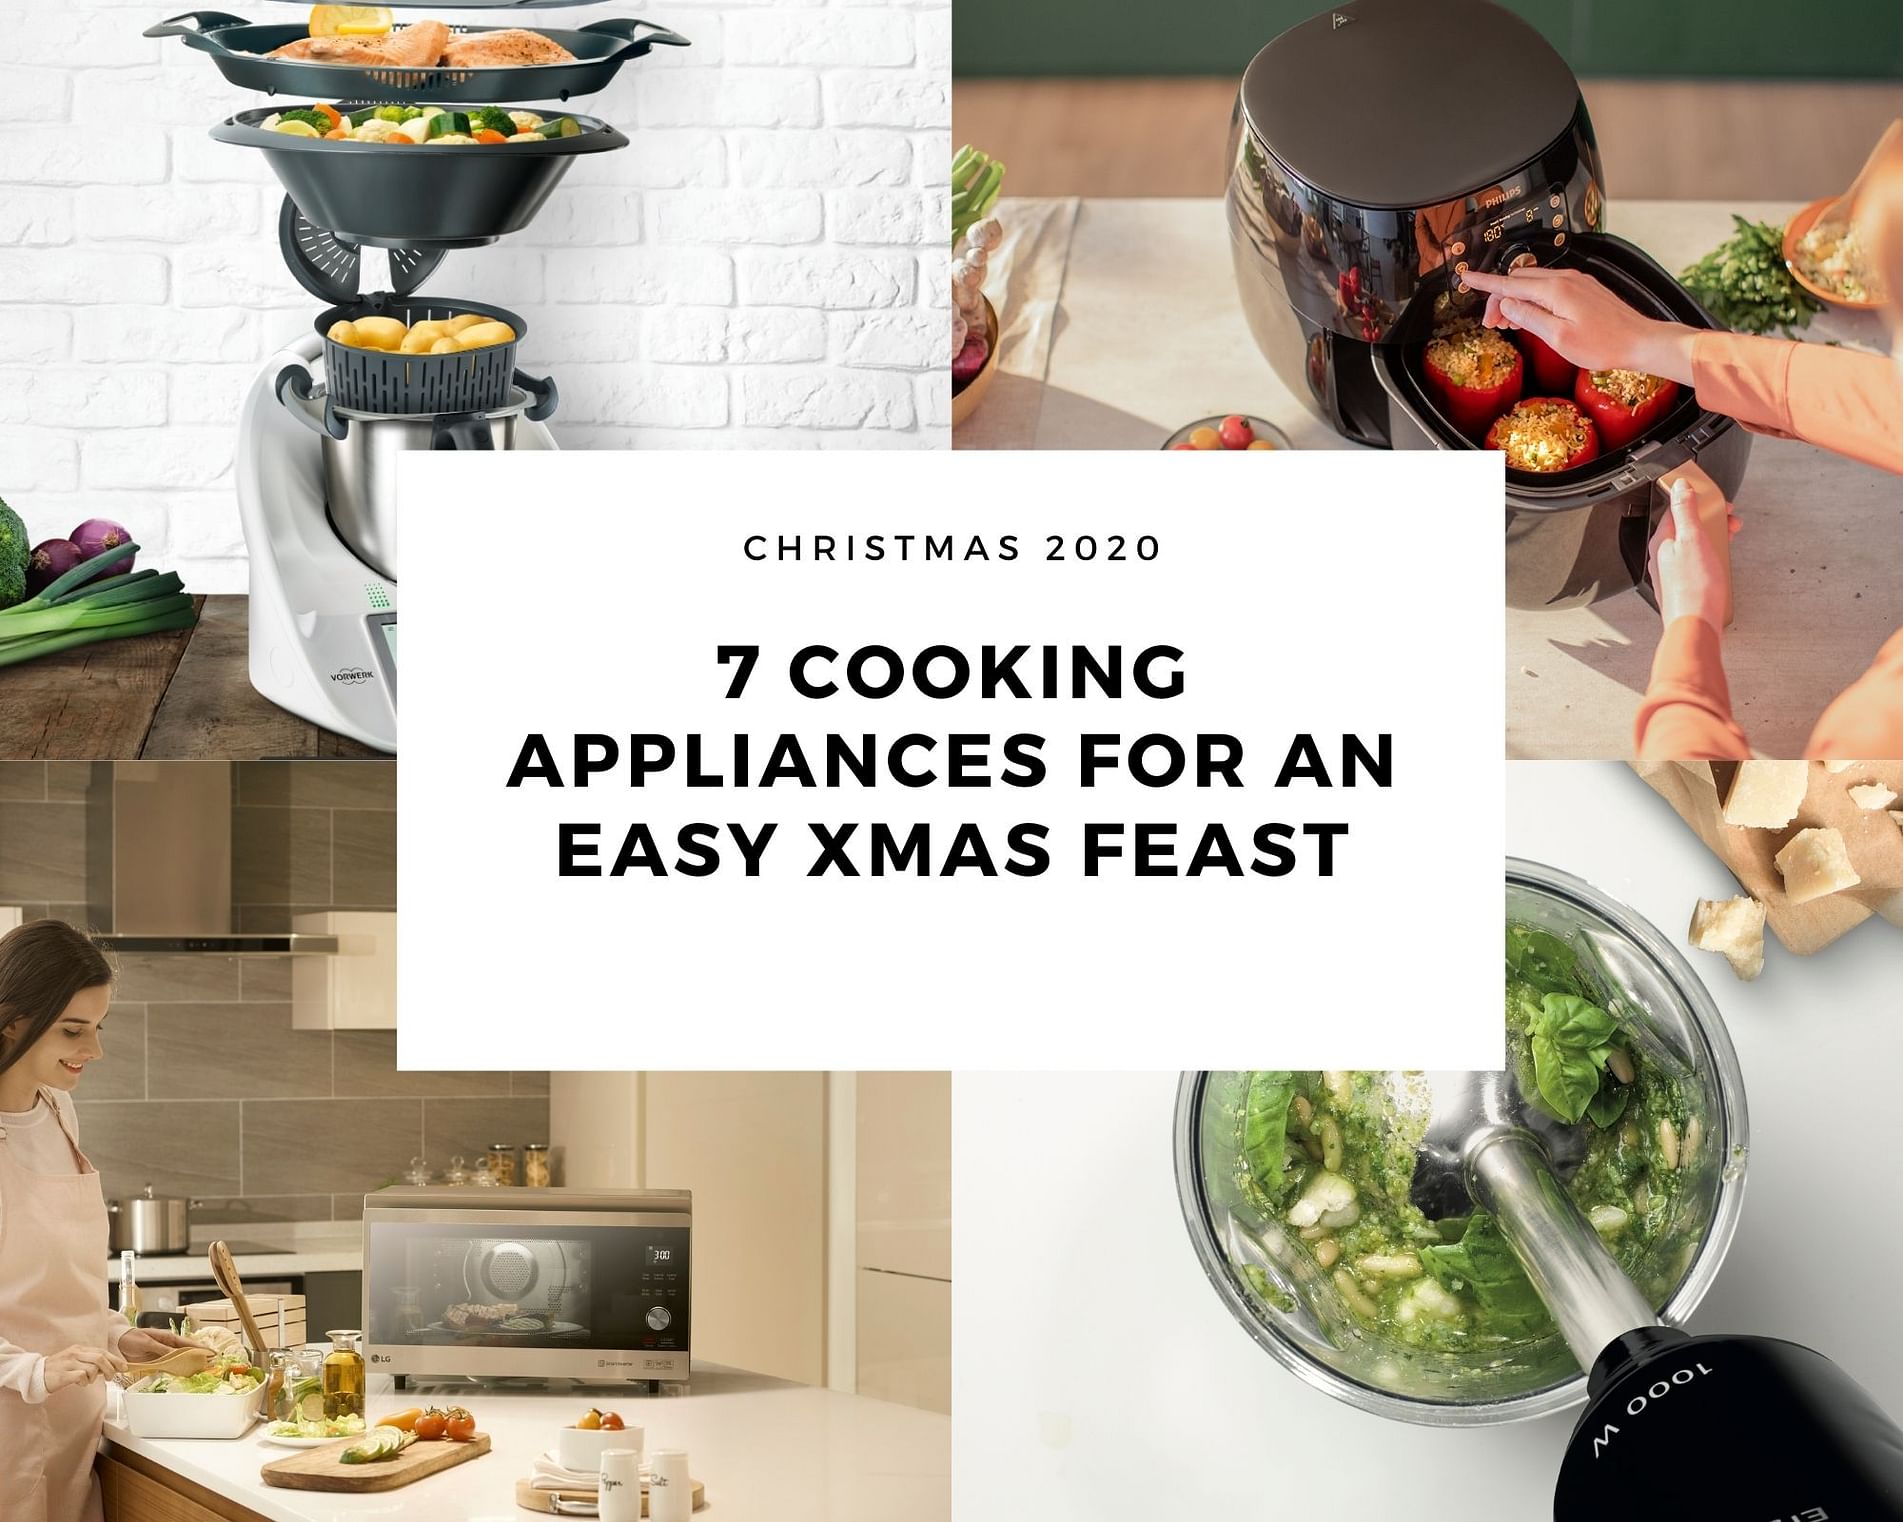 7 Cooking Appliances to Make Festive Feasts Easier - Home & Decor Singapore